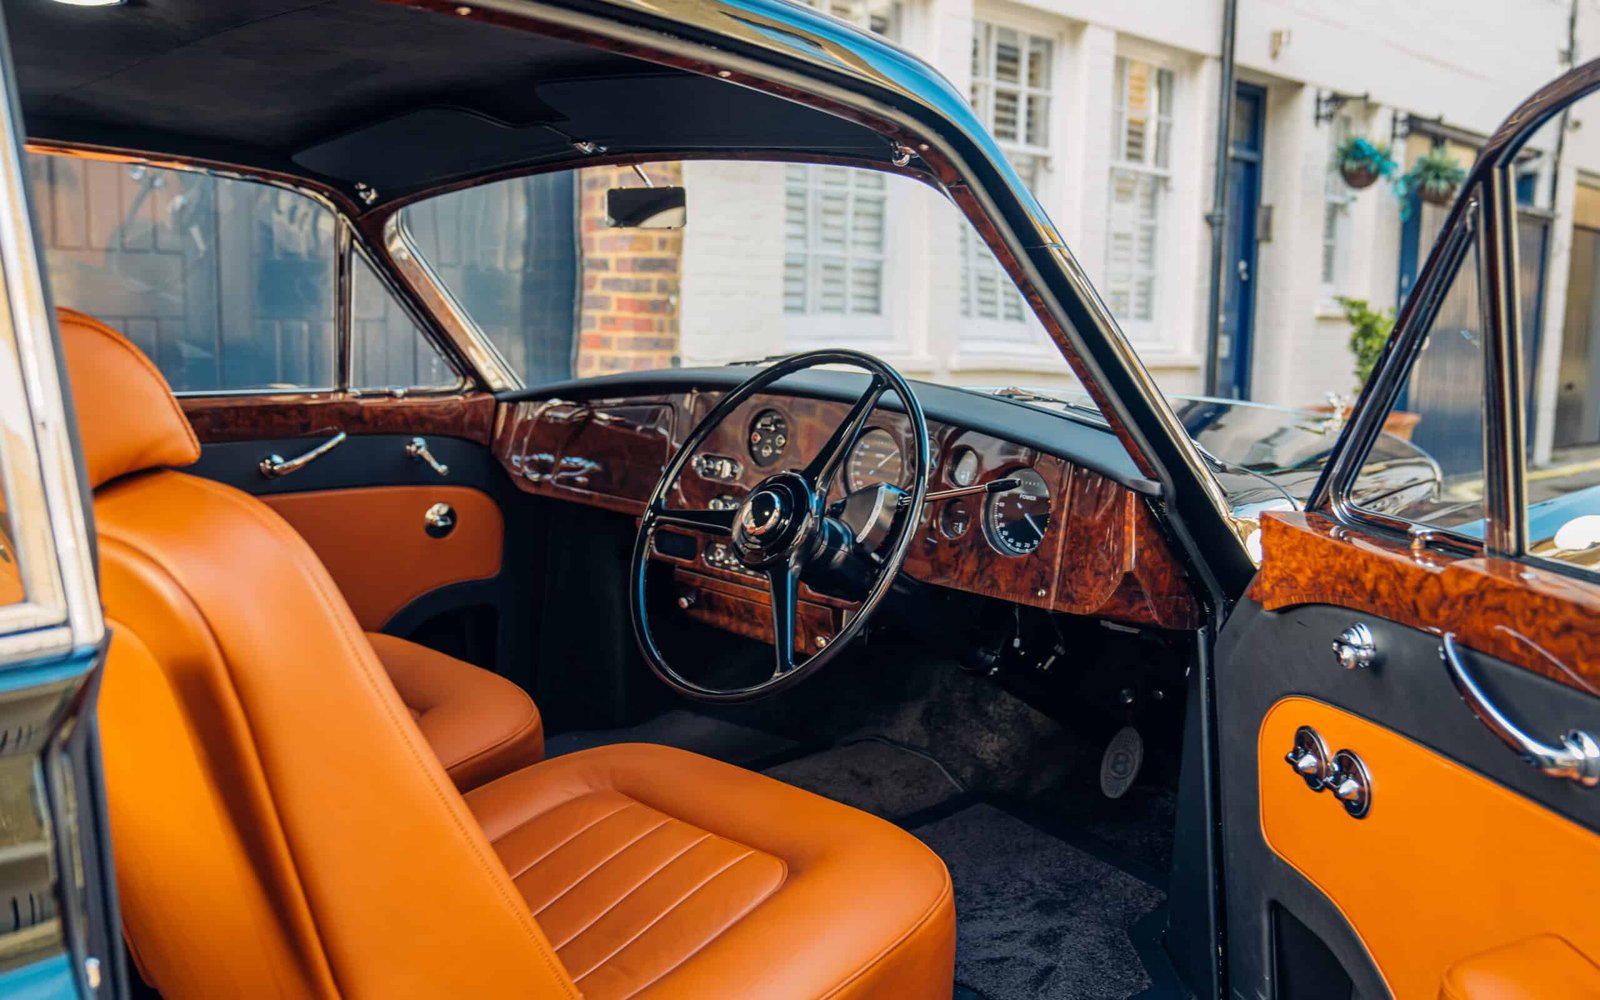 The interior of an old classic car with orange leather seats.